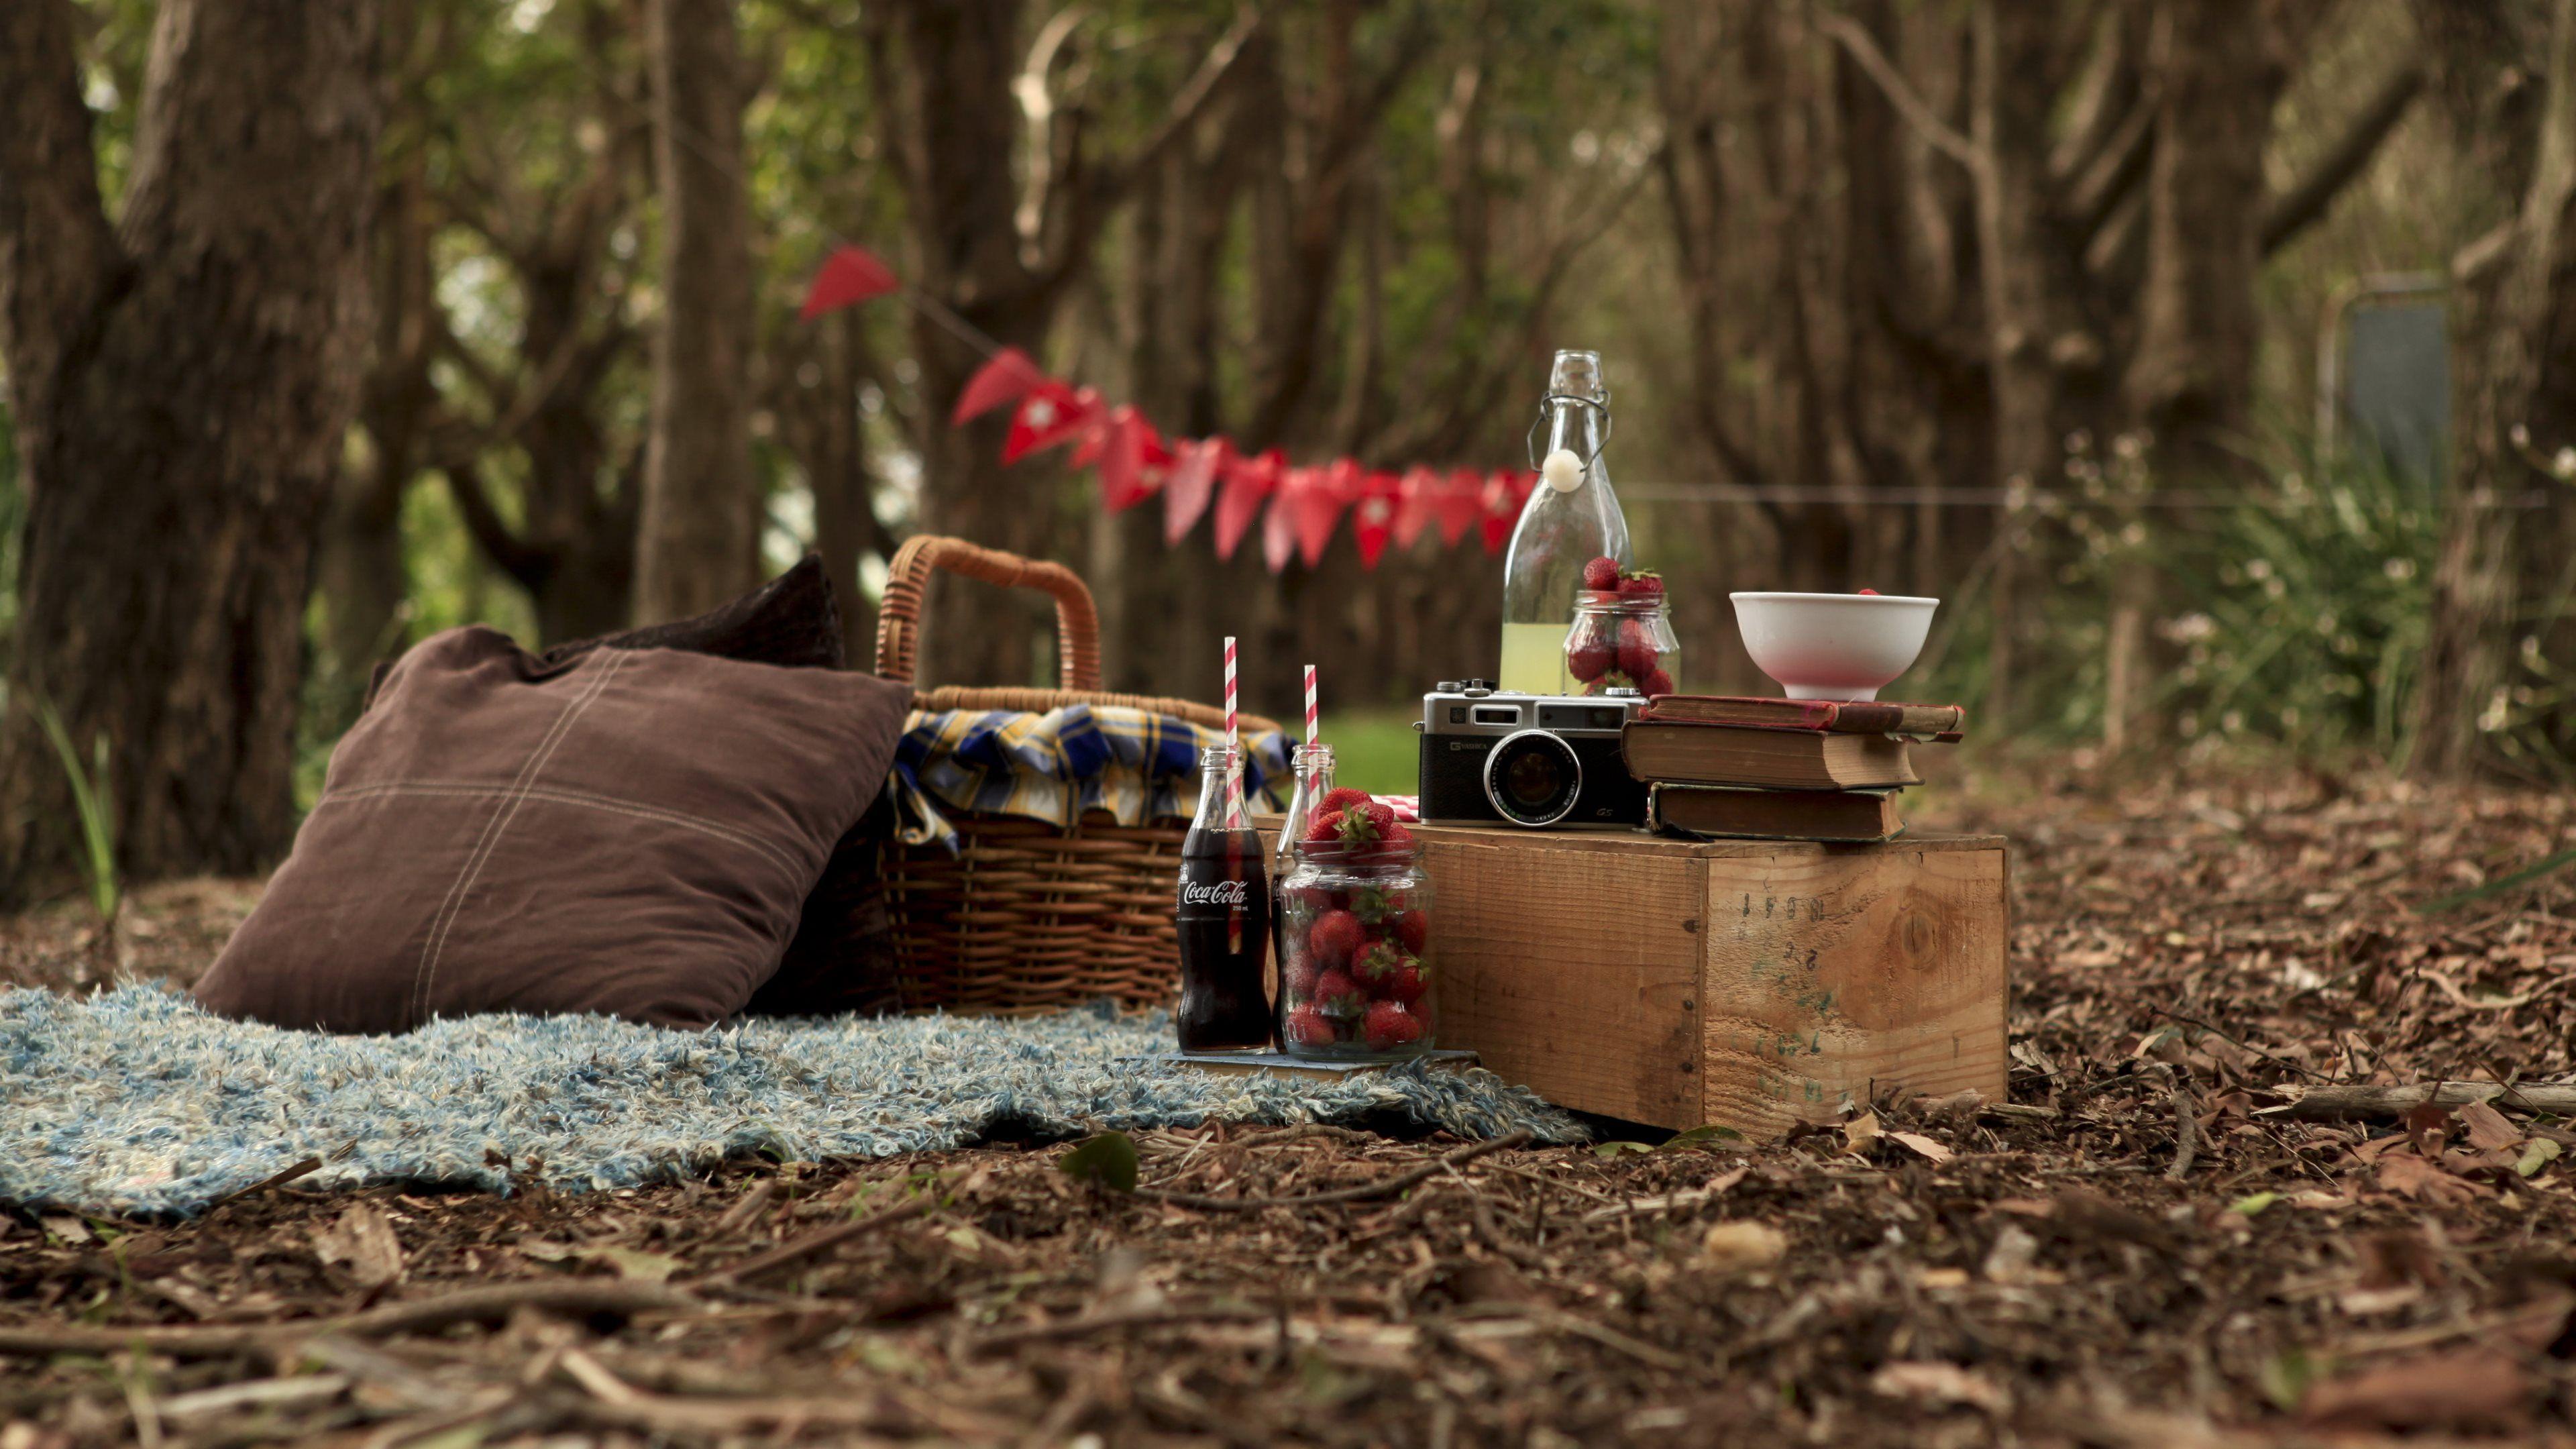 Picnic Wallpaper Picnic Modern High Definition Picture